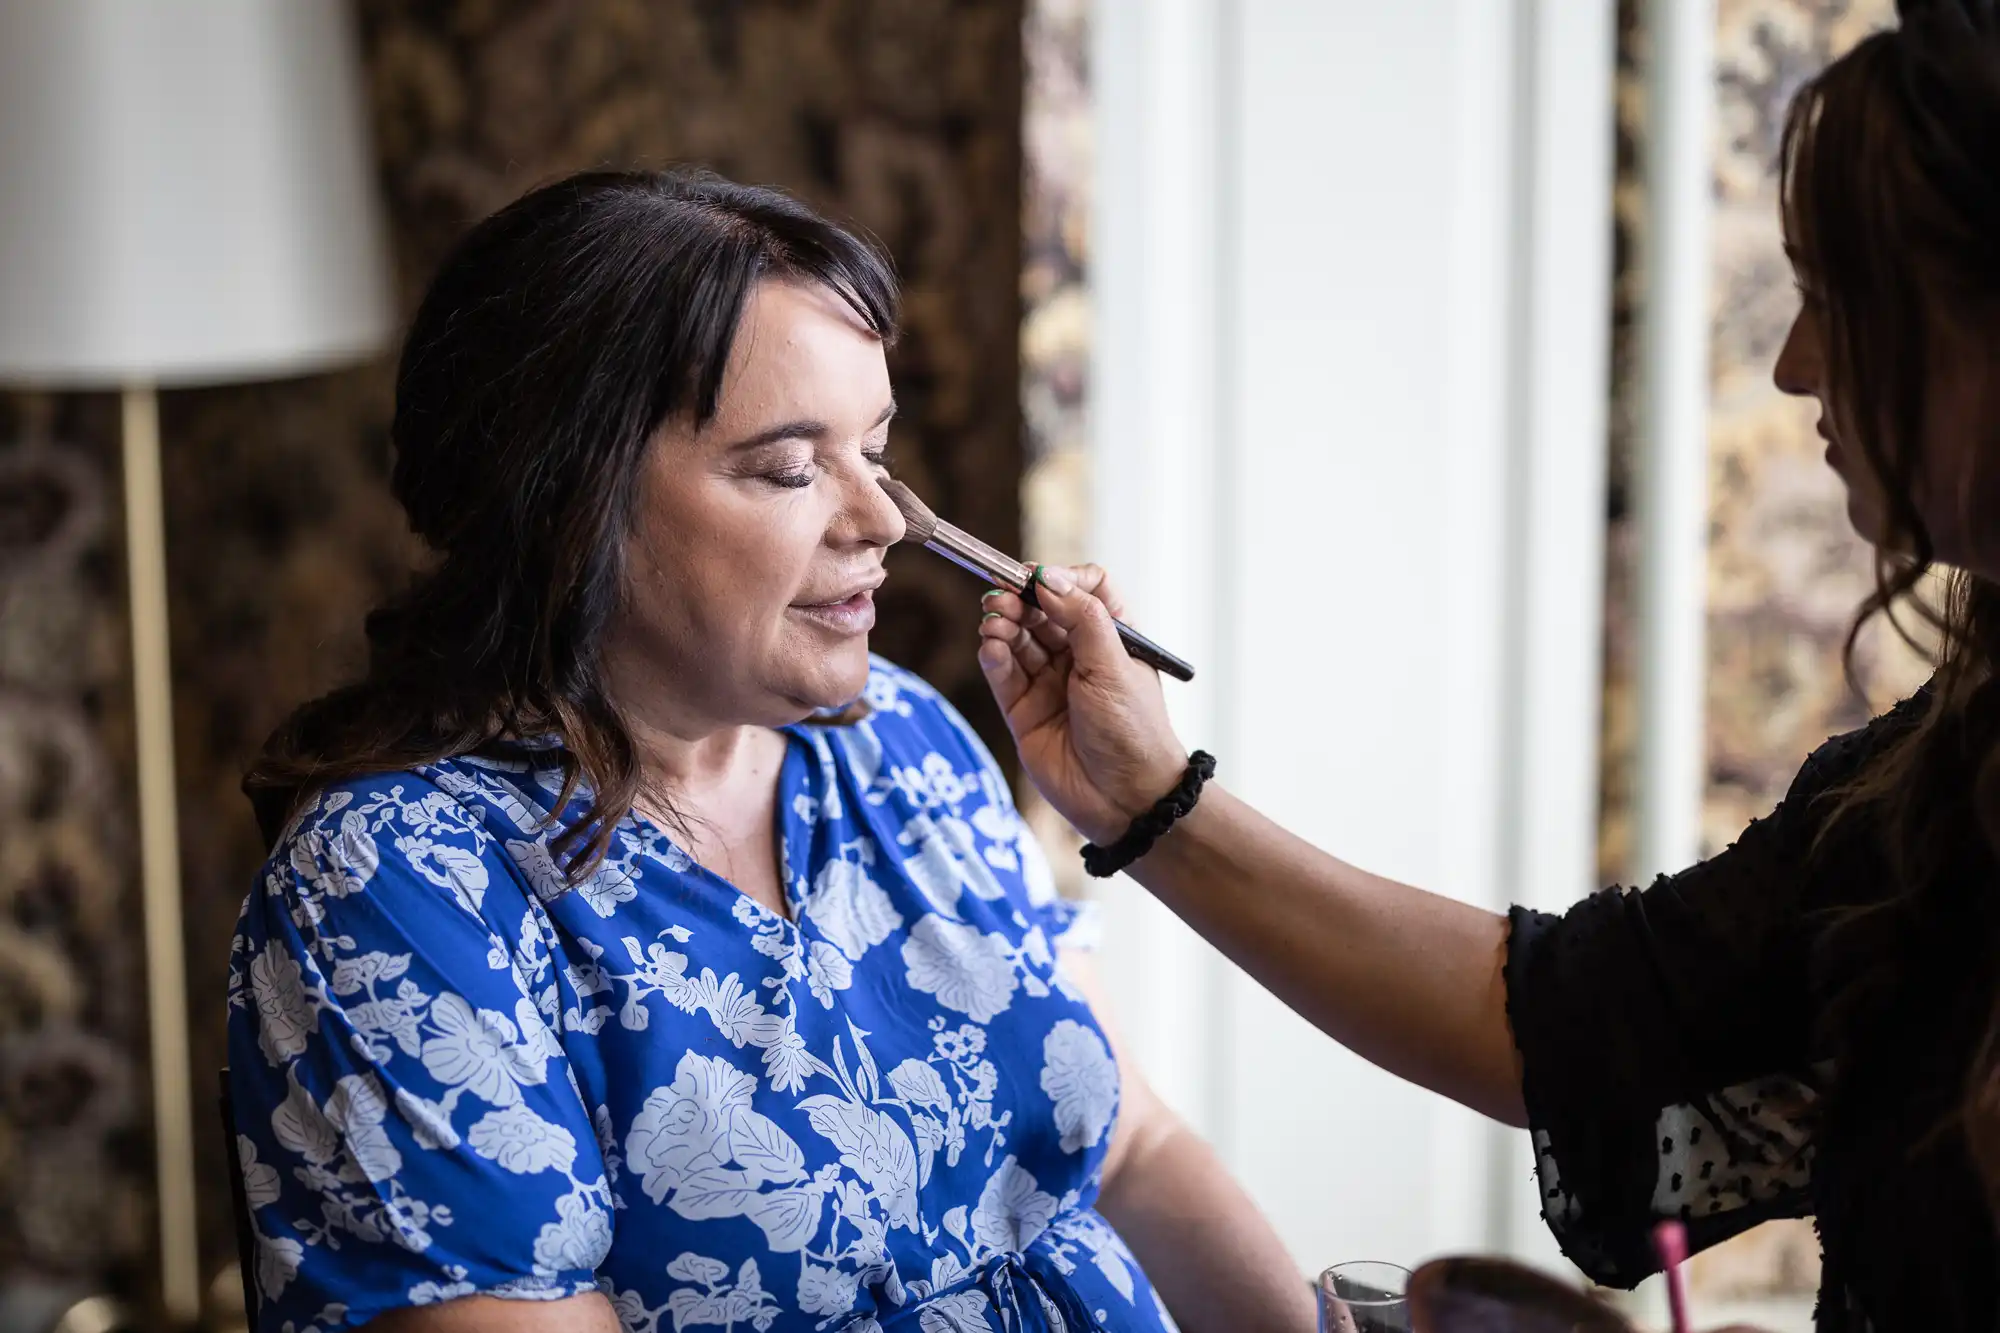 mother of the bride makeup being applied during pre-ceremony preparations